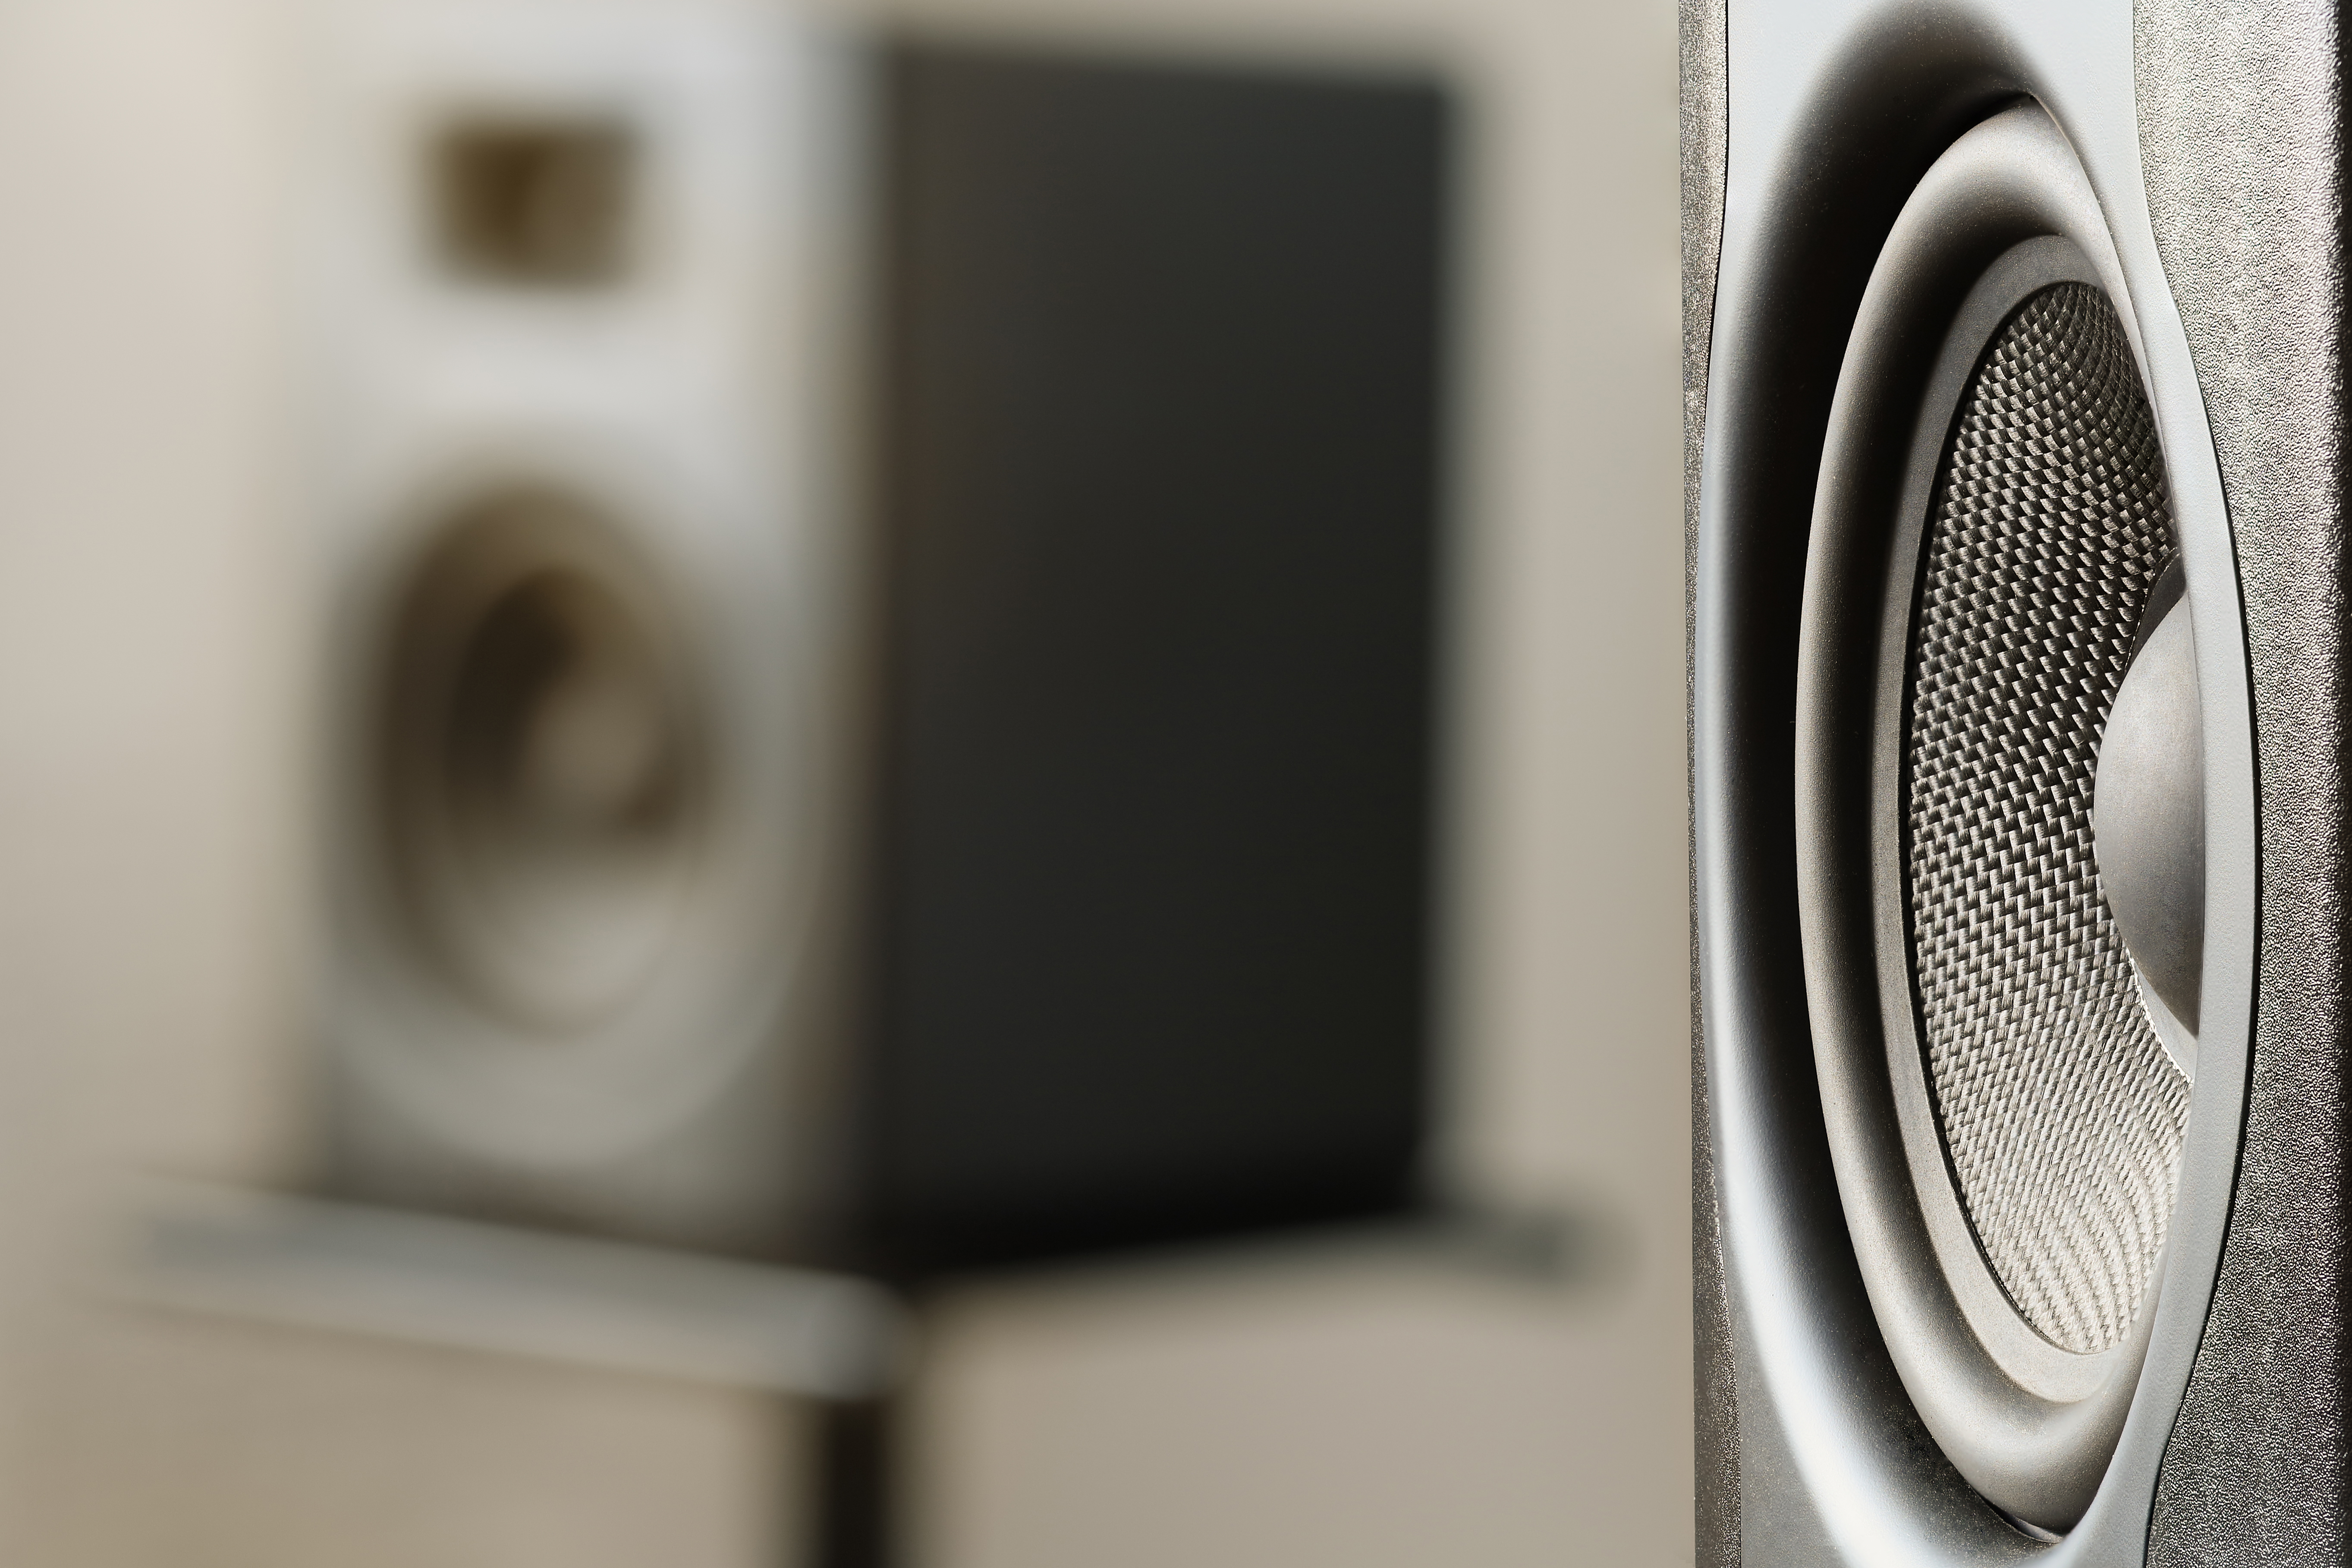 Material selection and design principles of the housing have a major impact on the sound quality of a speaker 